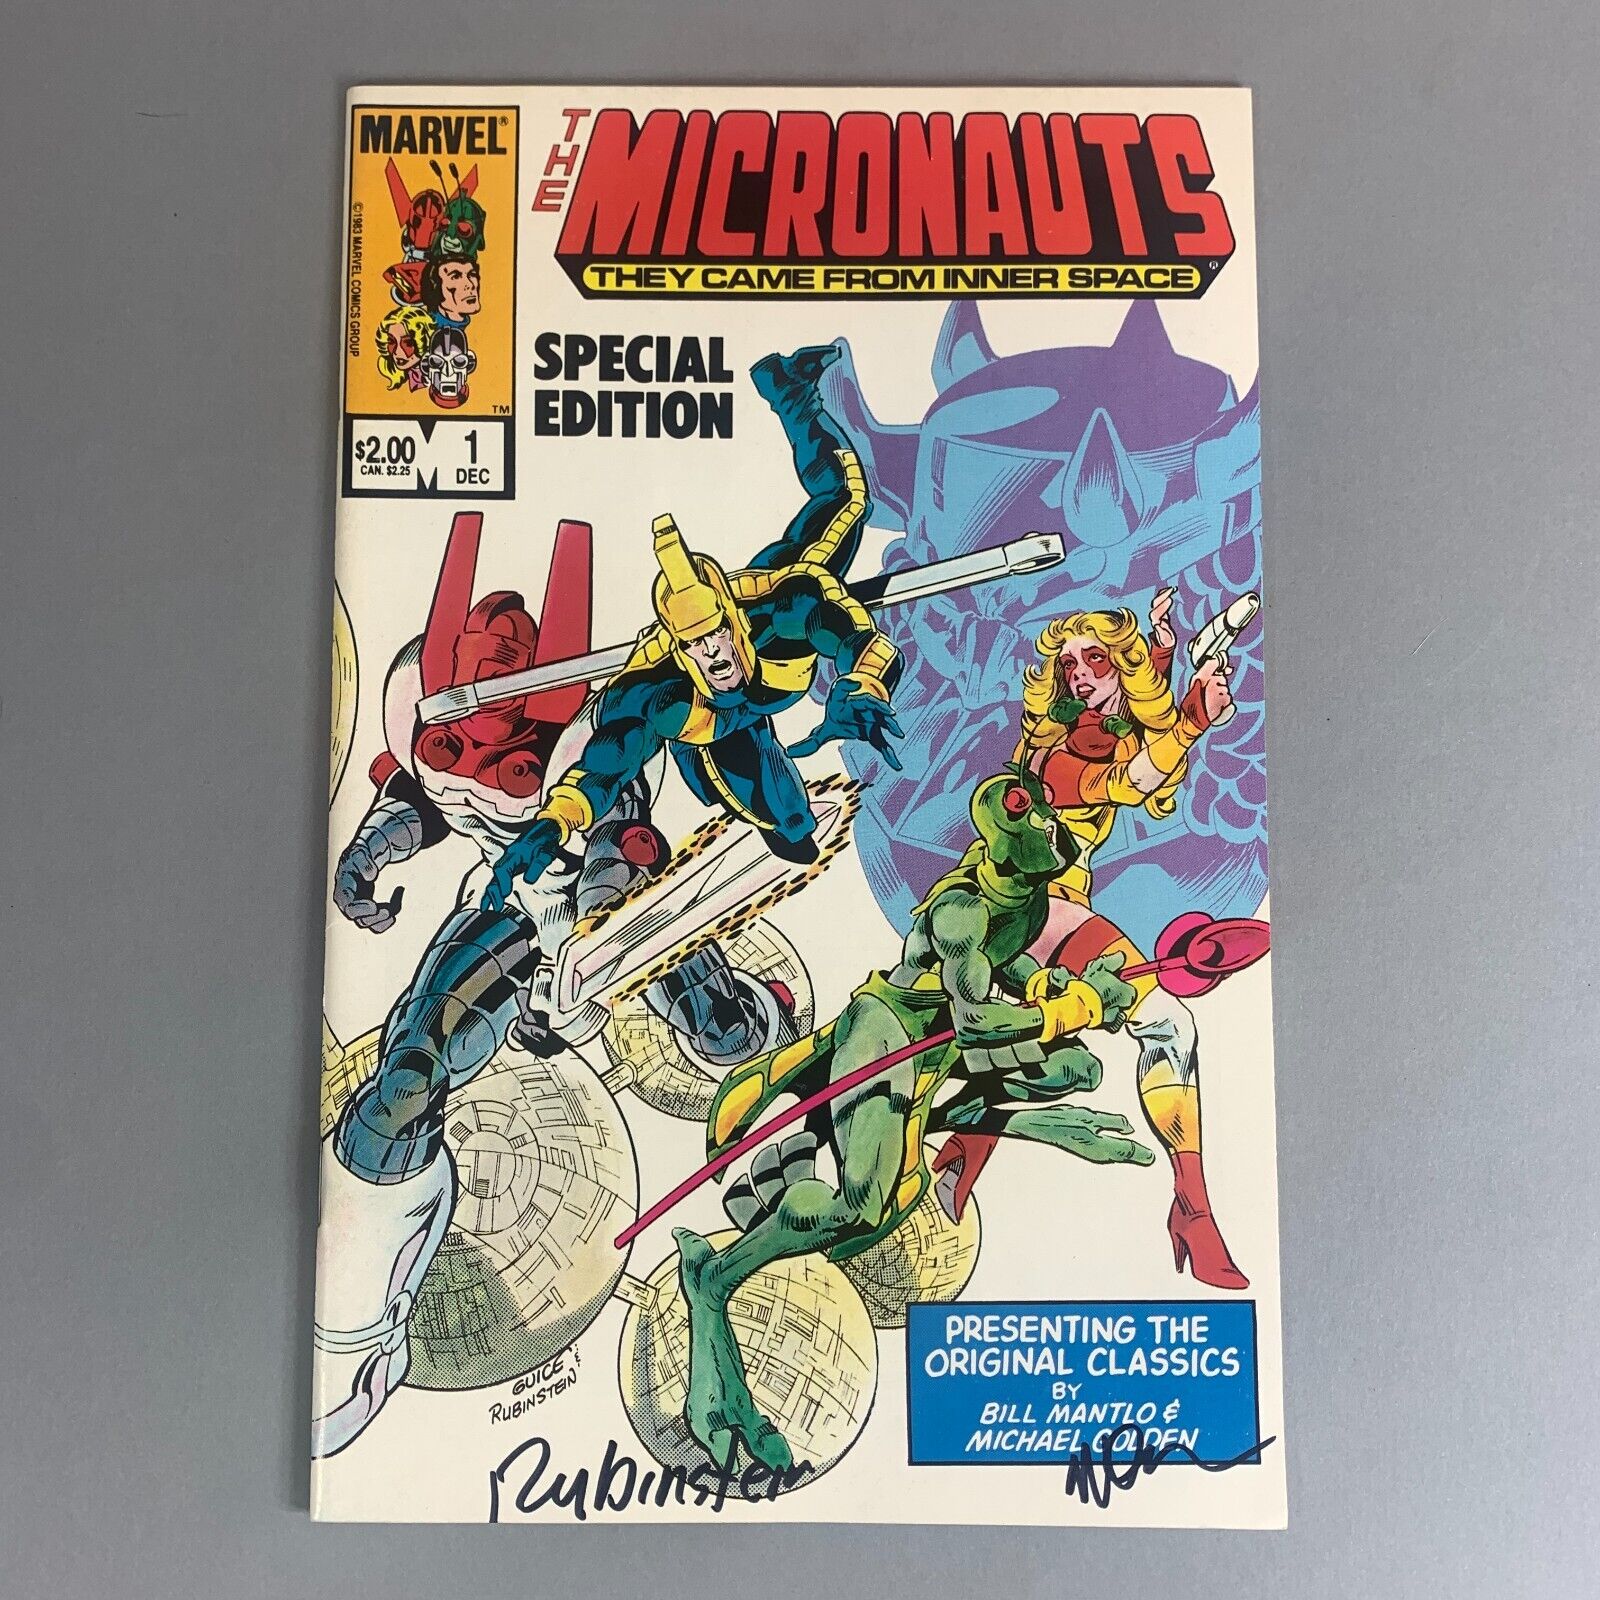 The Micronauts #1 1983 Special Edition Signed by Michael Golden & Joe Rubinstein